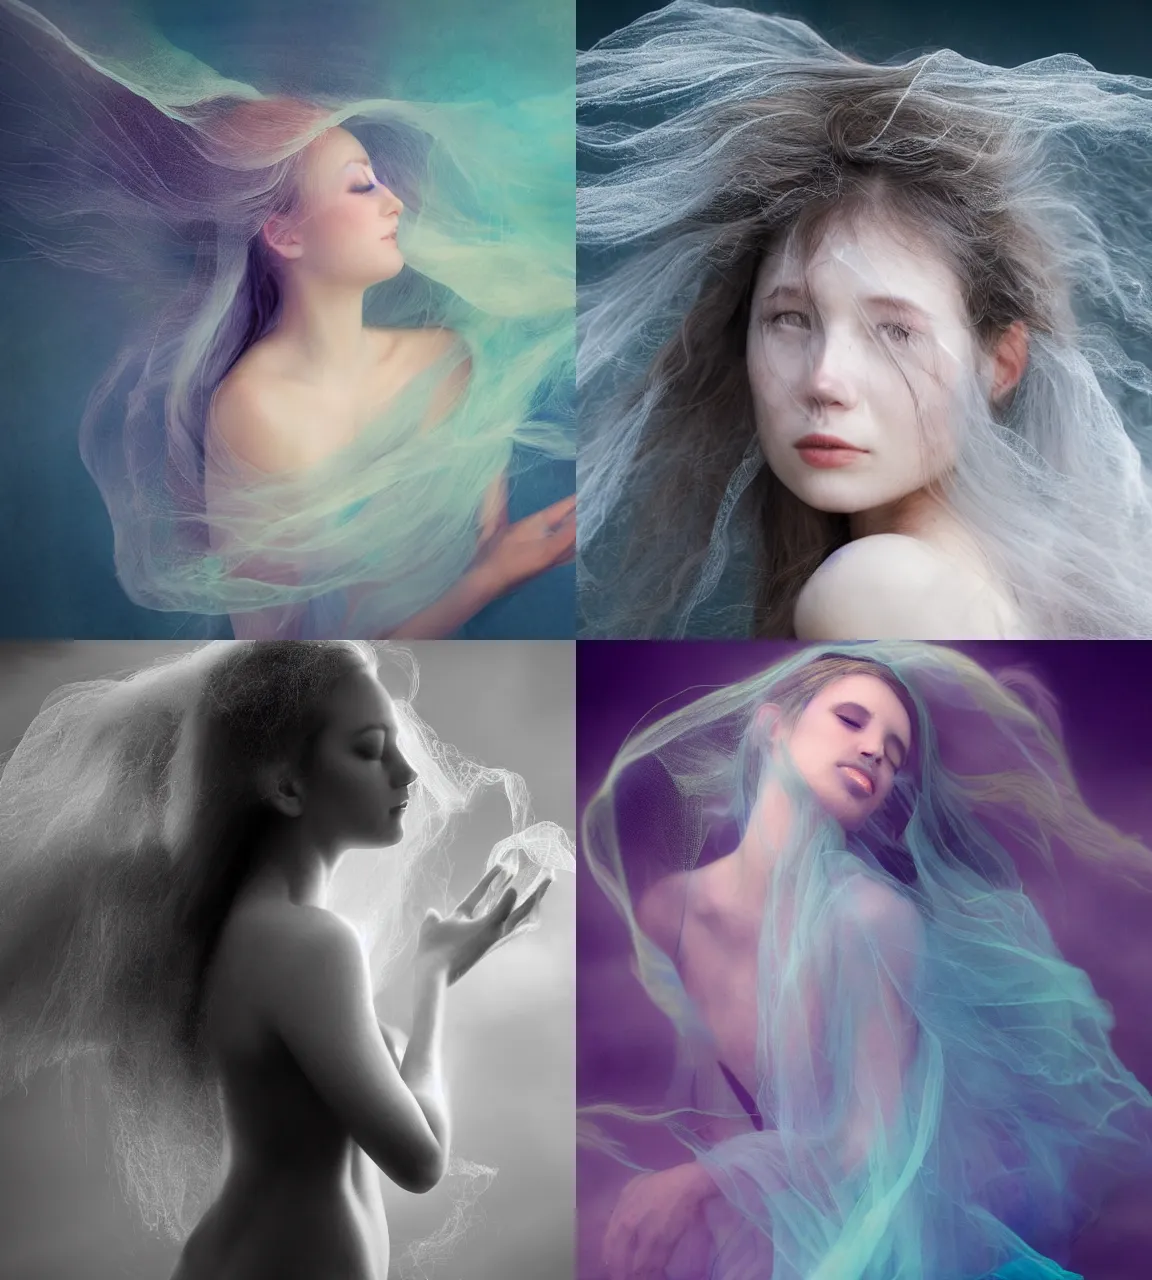 Prompt: Portrait of a beautiful wind nymph aurae, translucent and vaporous body evaporating into wispy tendrils of wind and clouds, wearing ethereal iridescent veils, her etheral hairs dispersing the light, giggling as she flies among the clouds